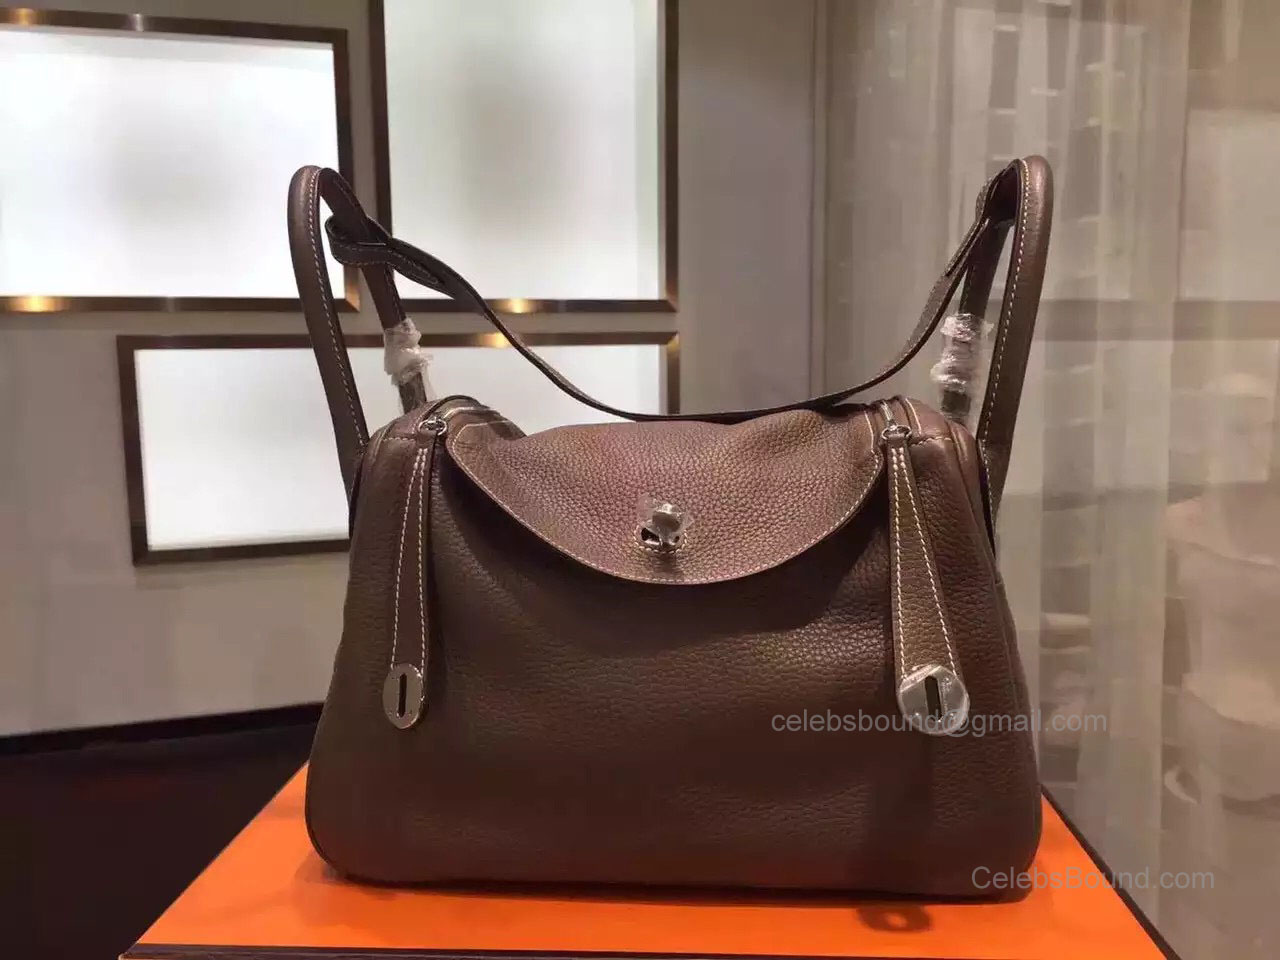 Hermes Lindy 30 Bag in Etoupe Taurillon Clemence Leather Handstitched